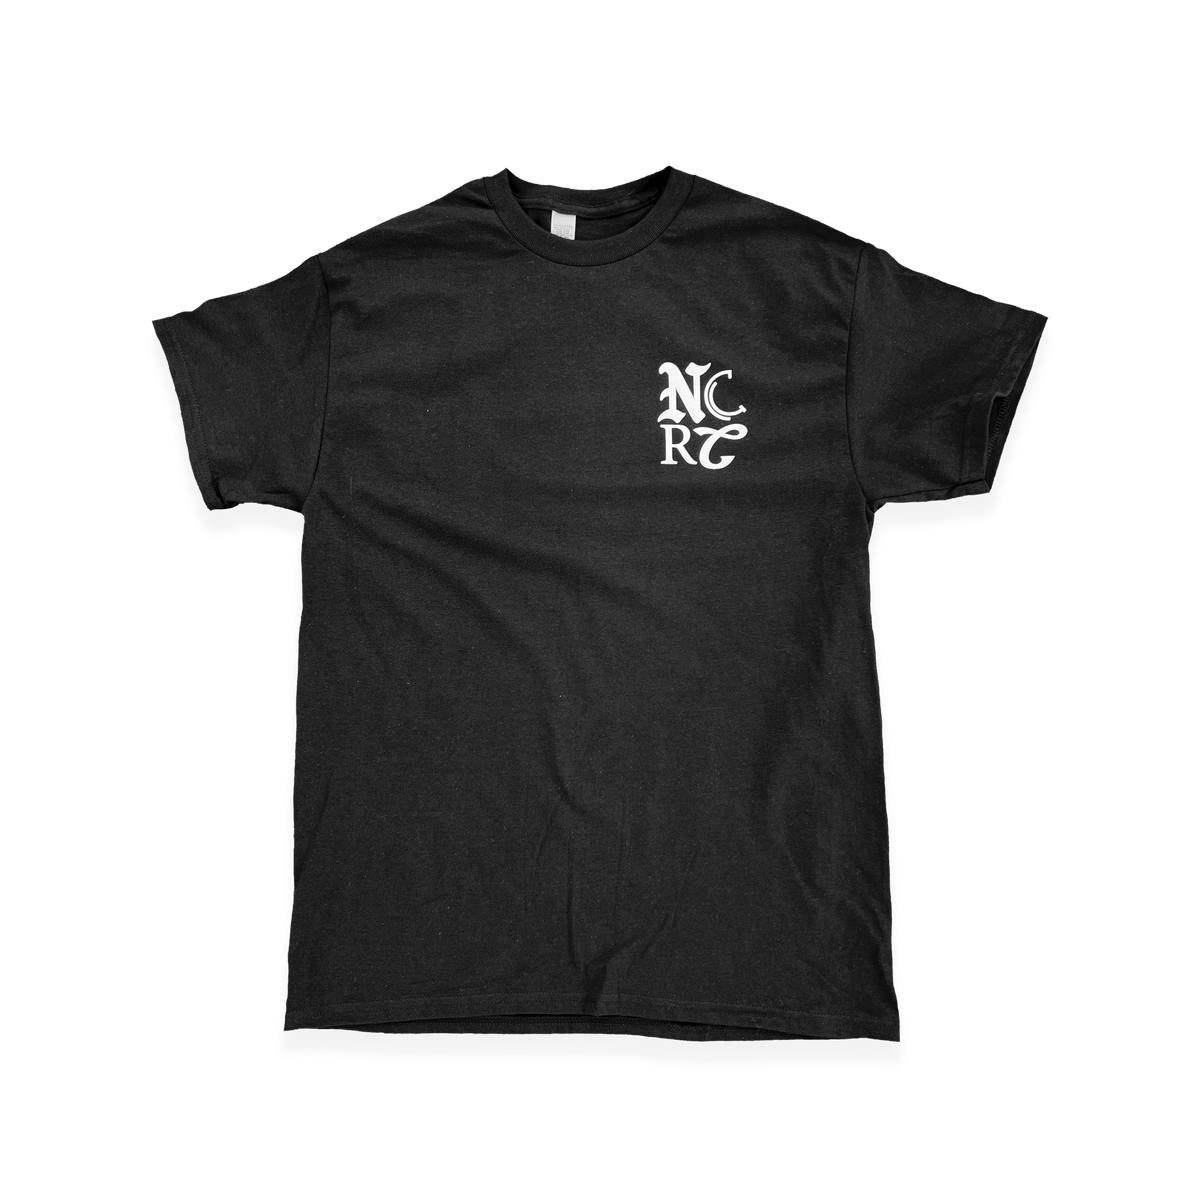 NCRC Unisex Fits: Forward Is The Motion - Black 100% Cotton Lifestyle ...